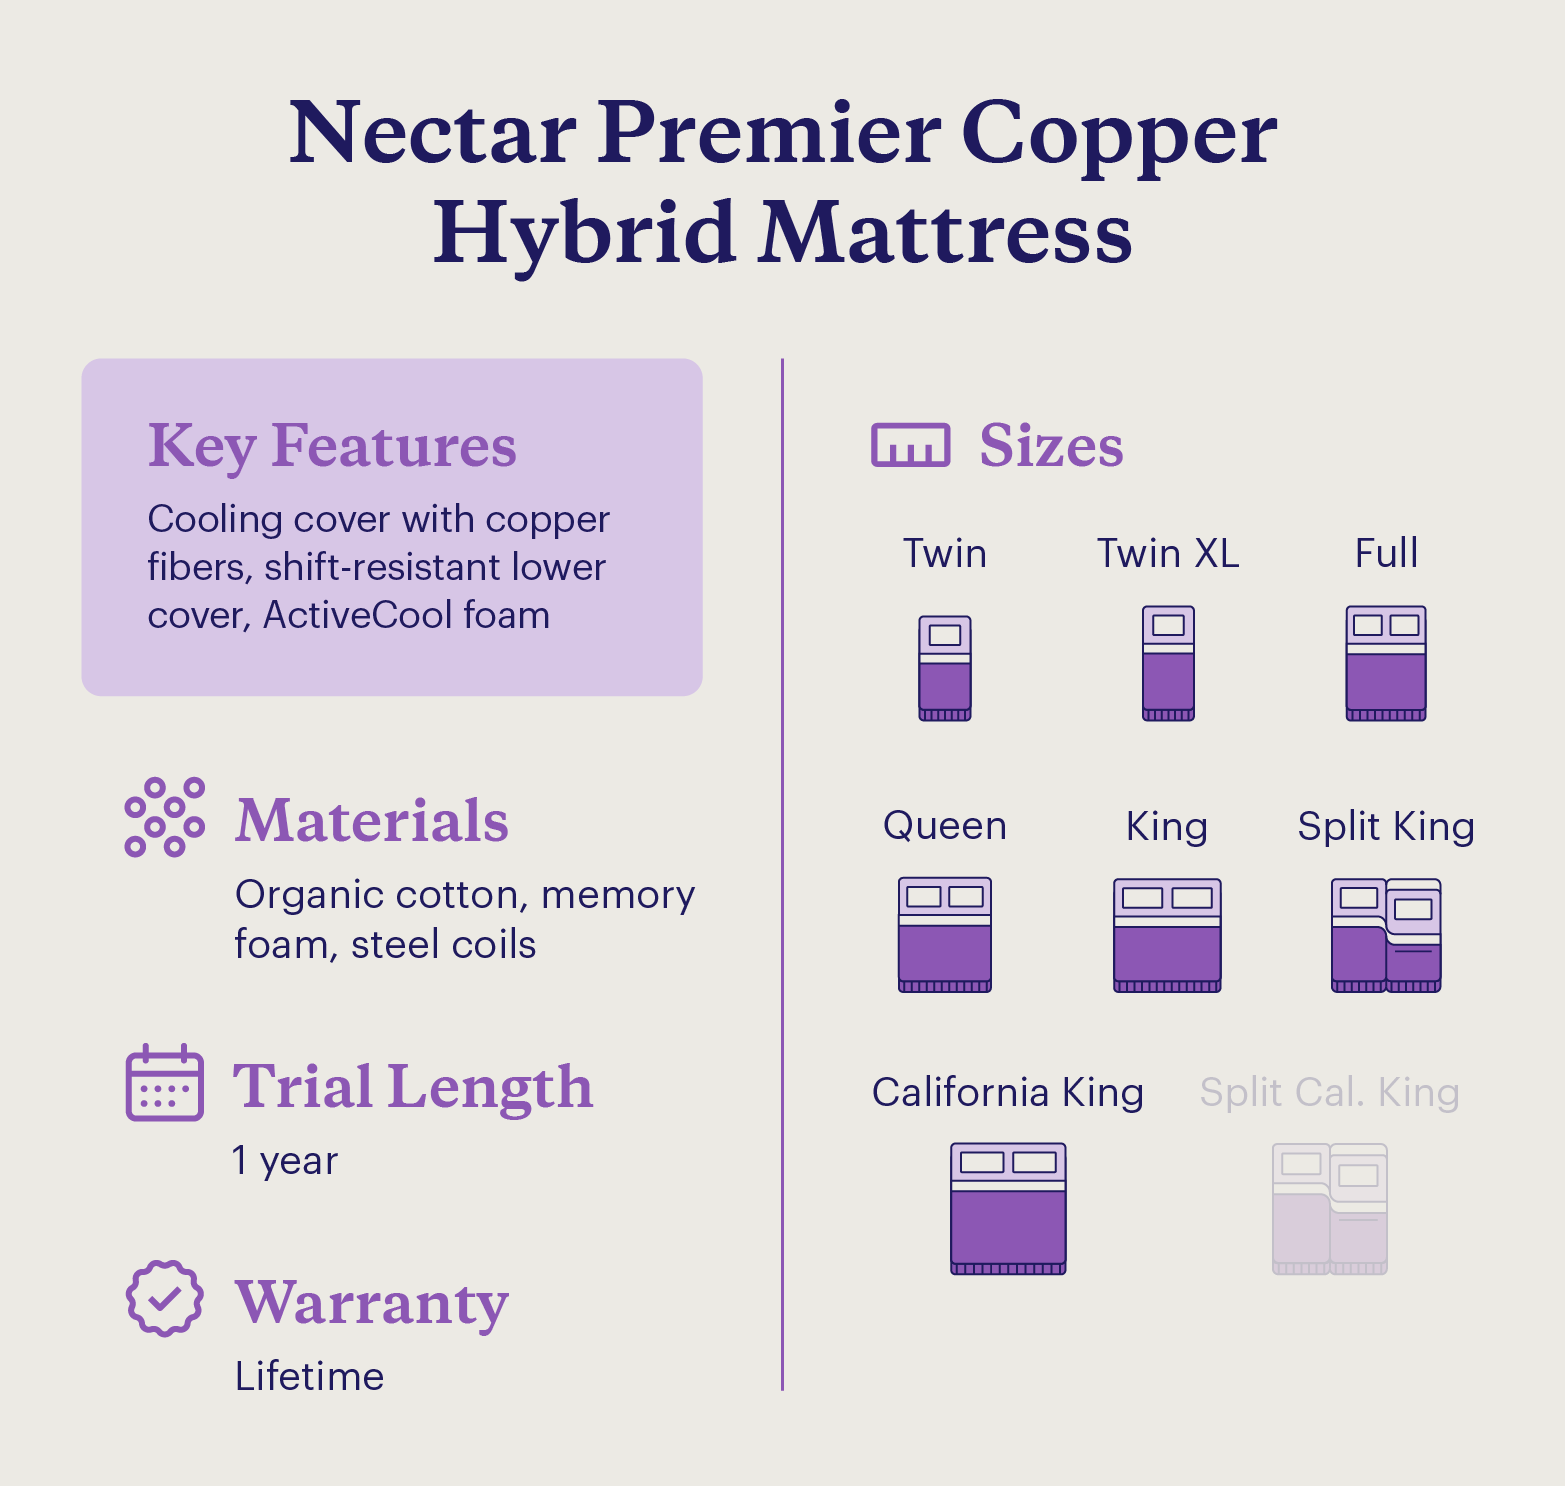 A graphic shows the key features and details of the Nectar Premier Copper Hybrid Mattress.